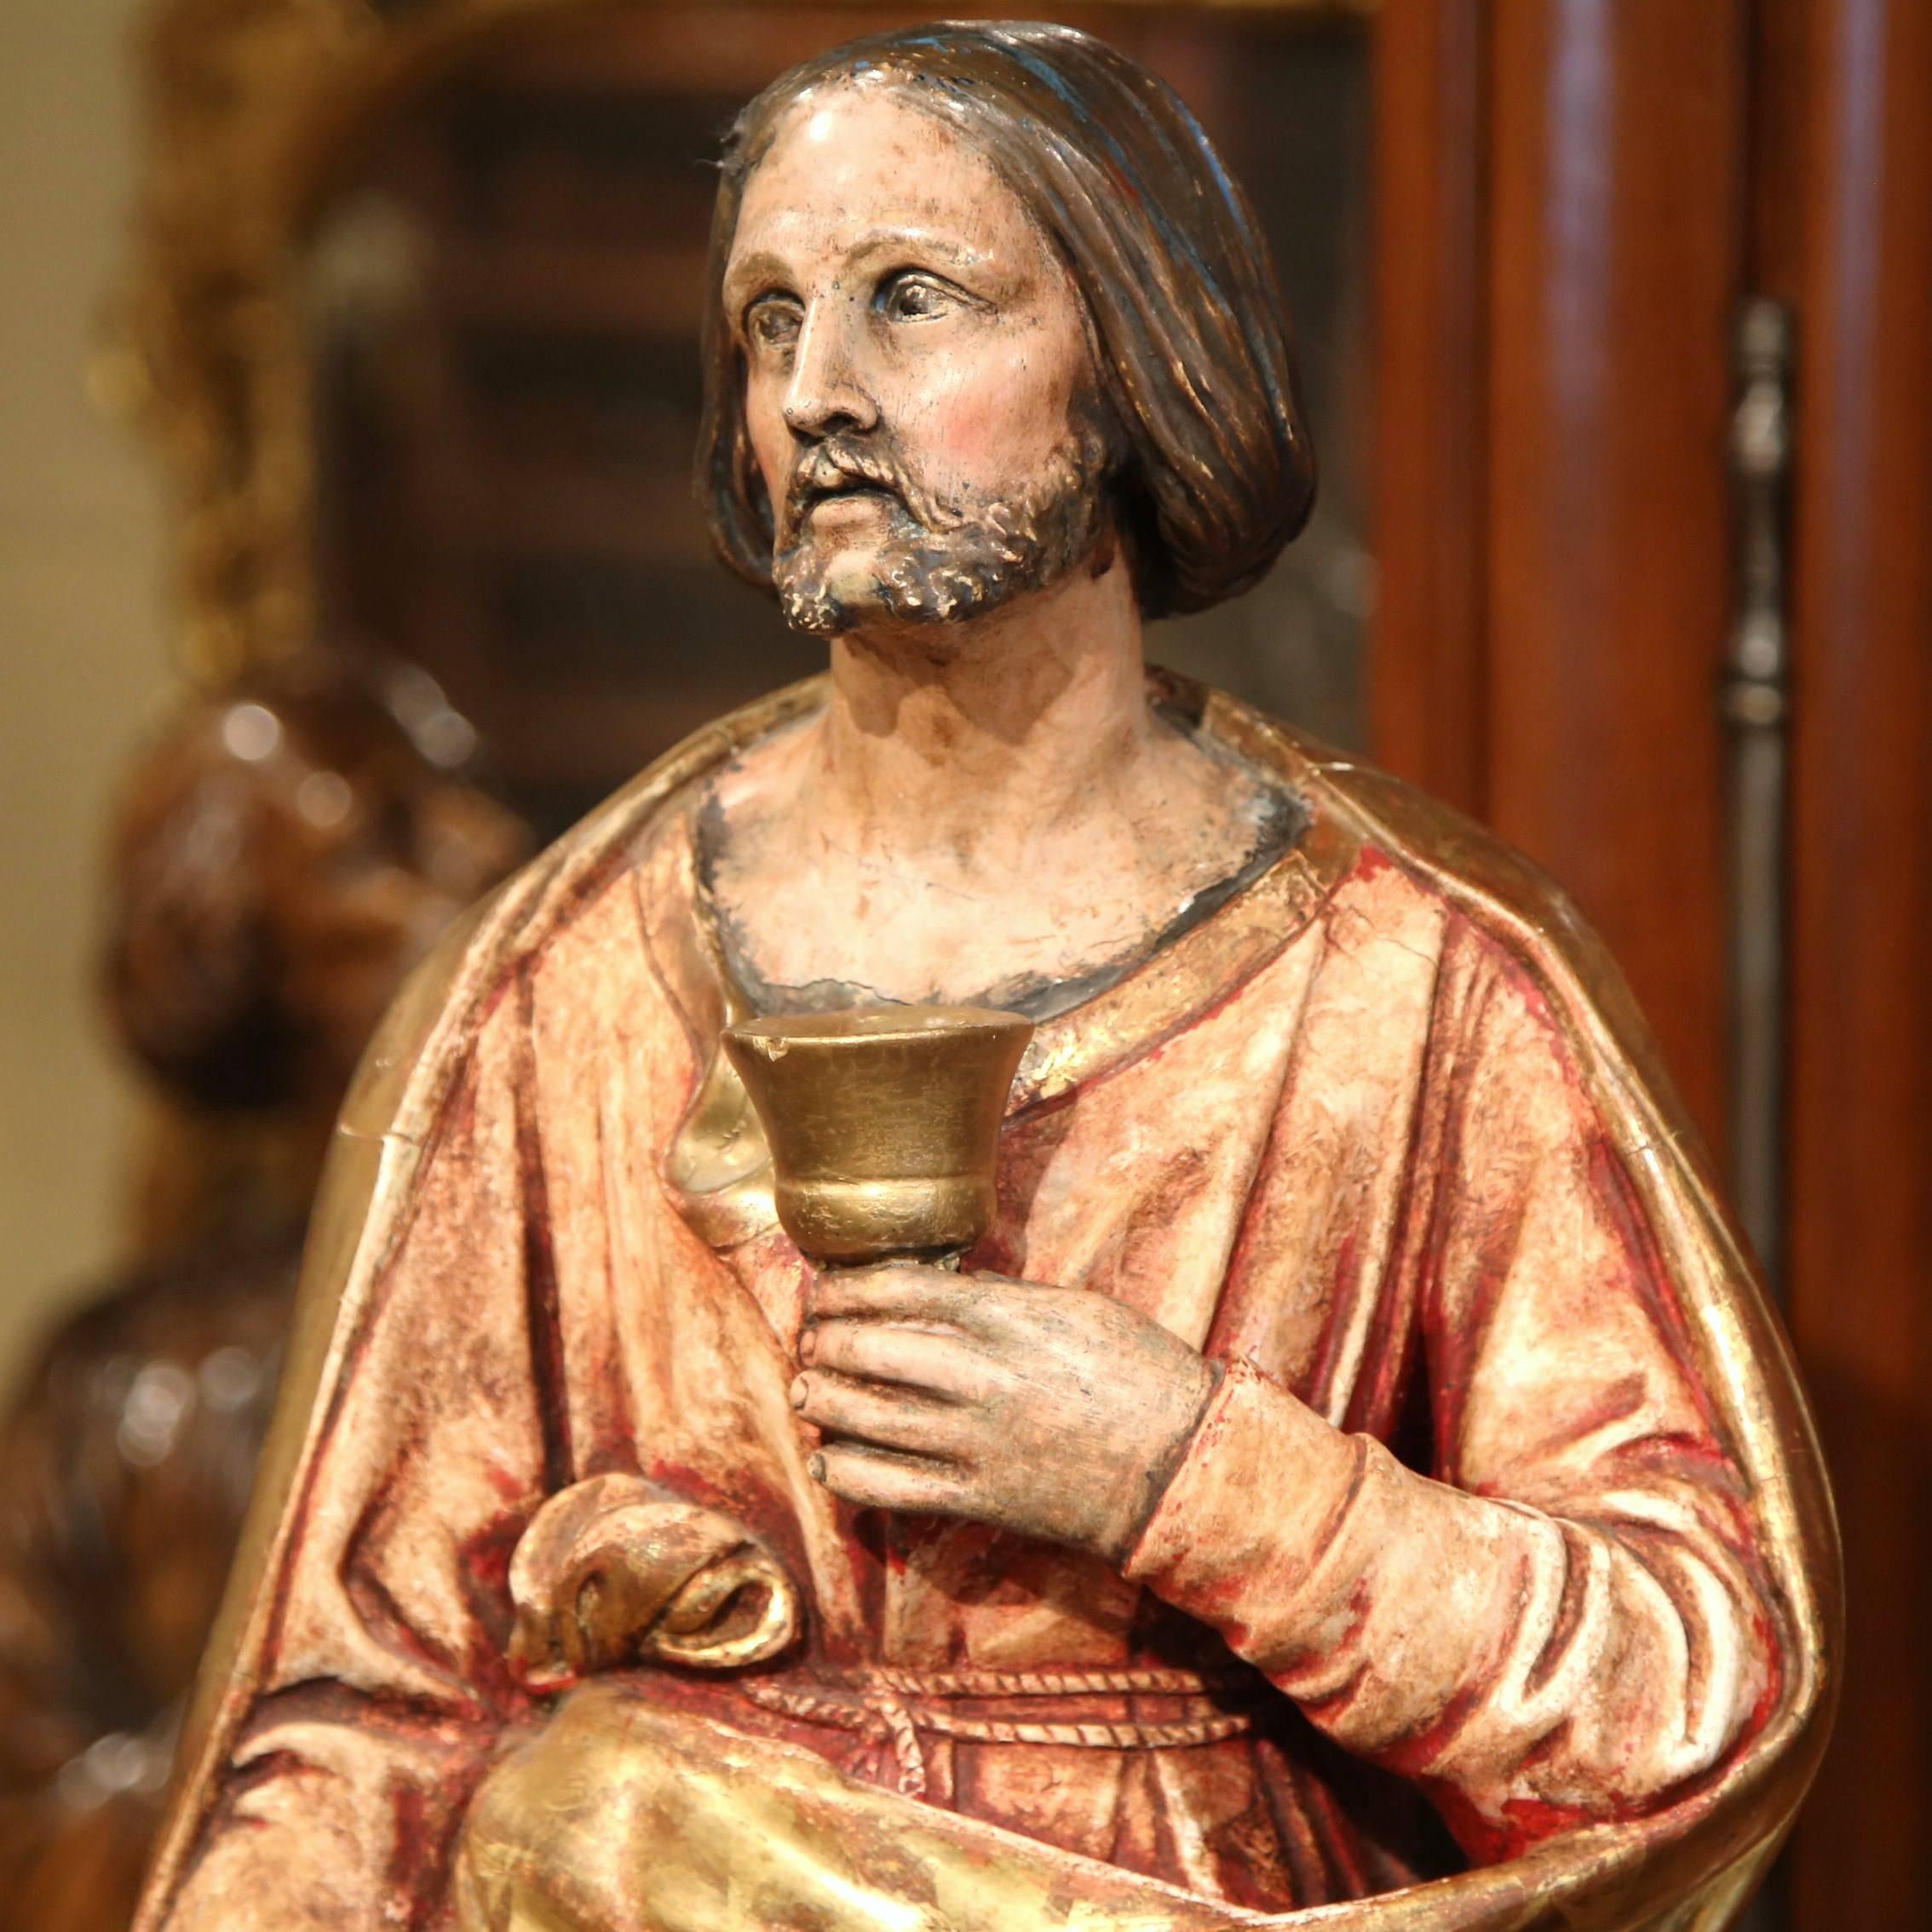 Make a statement in your home with this beautifully carved antique statue of Christ. Crafted in Southern France, circa 1820, the sculpture depicts the Lord holding a chalice with his robes draped around him. The religious figure has a nicely carved